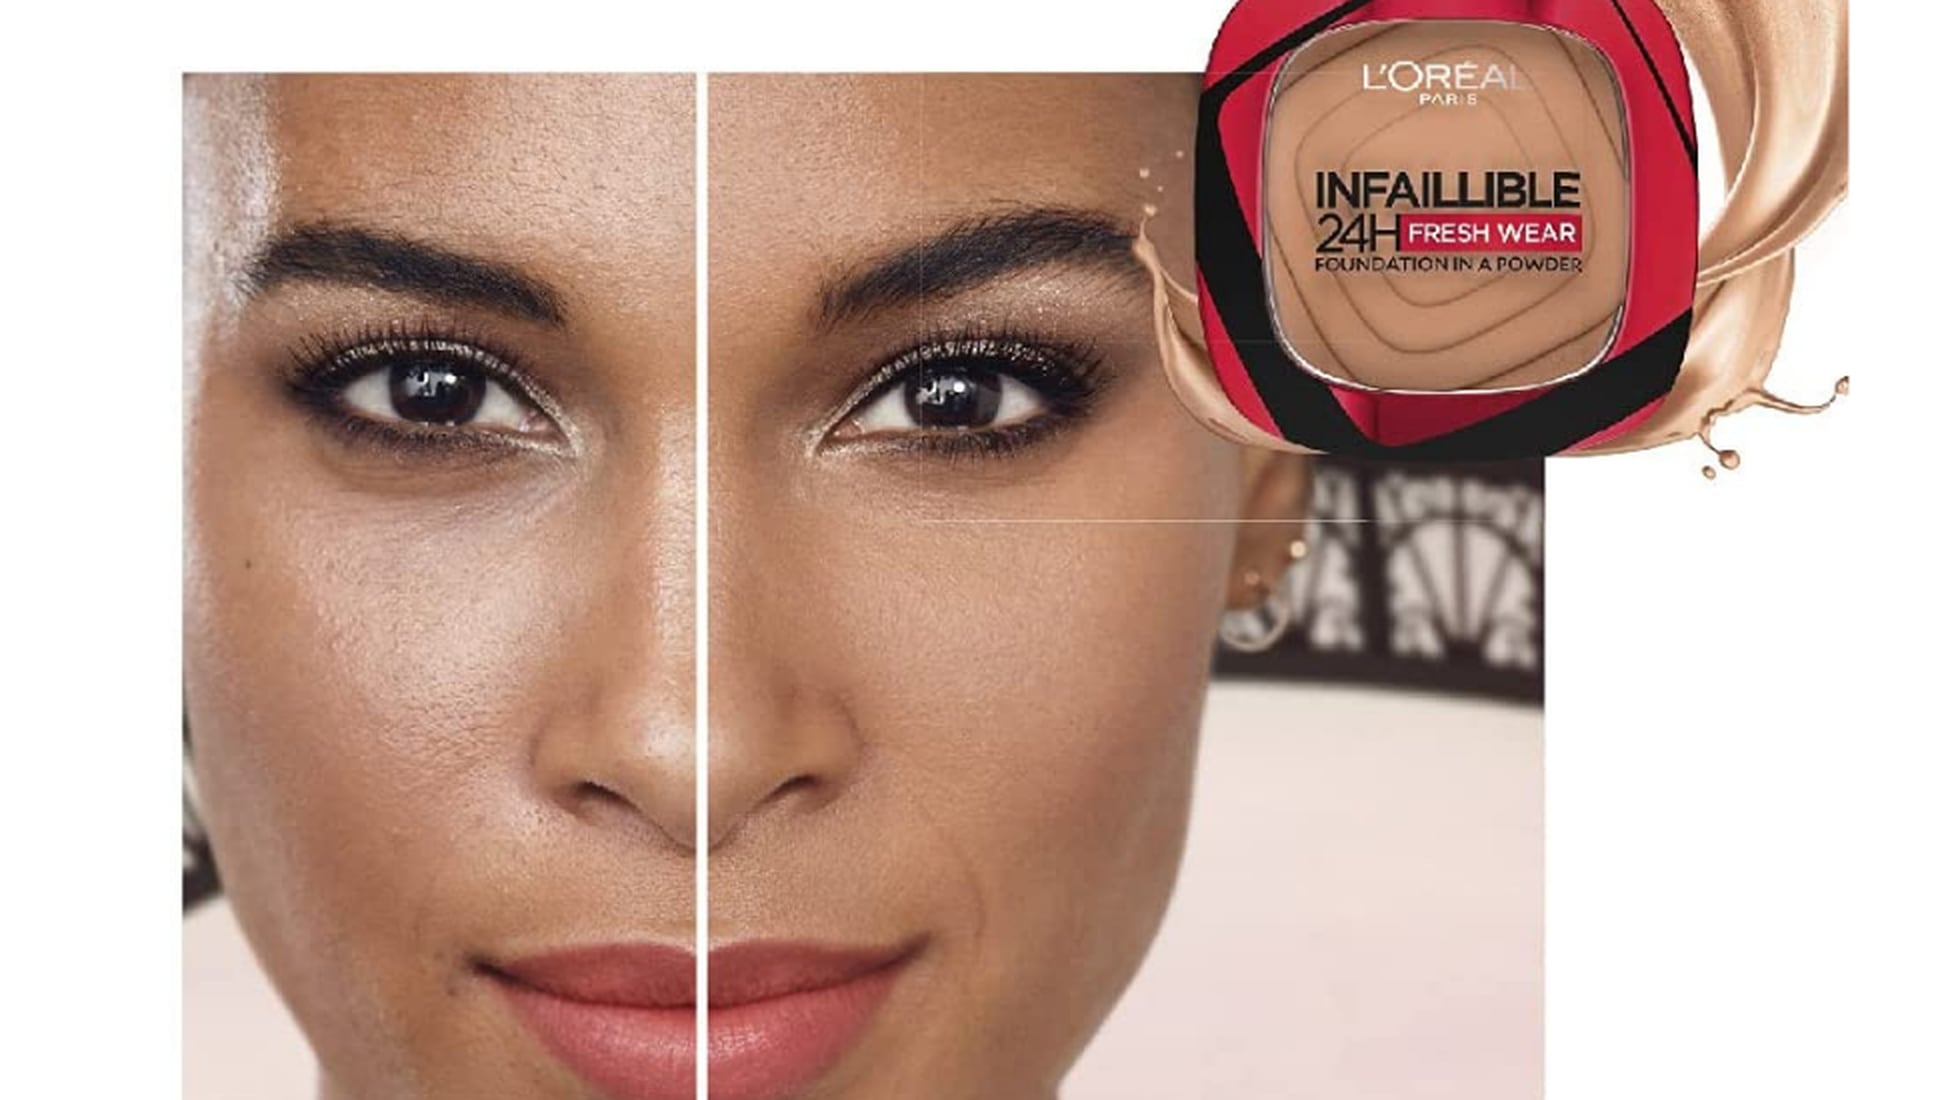 Maquillaje loreal infalible 24 horas